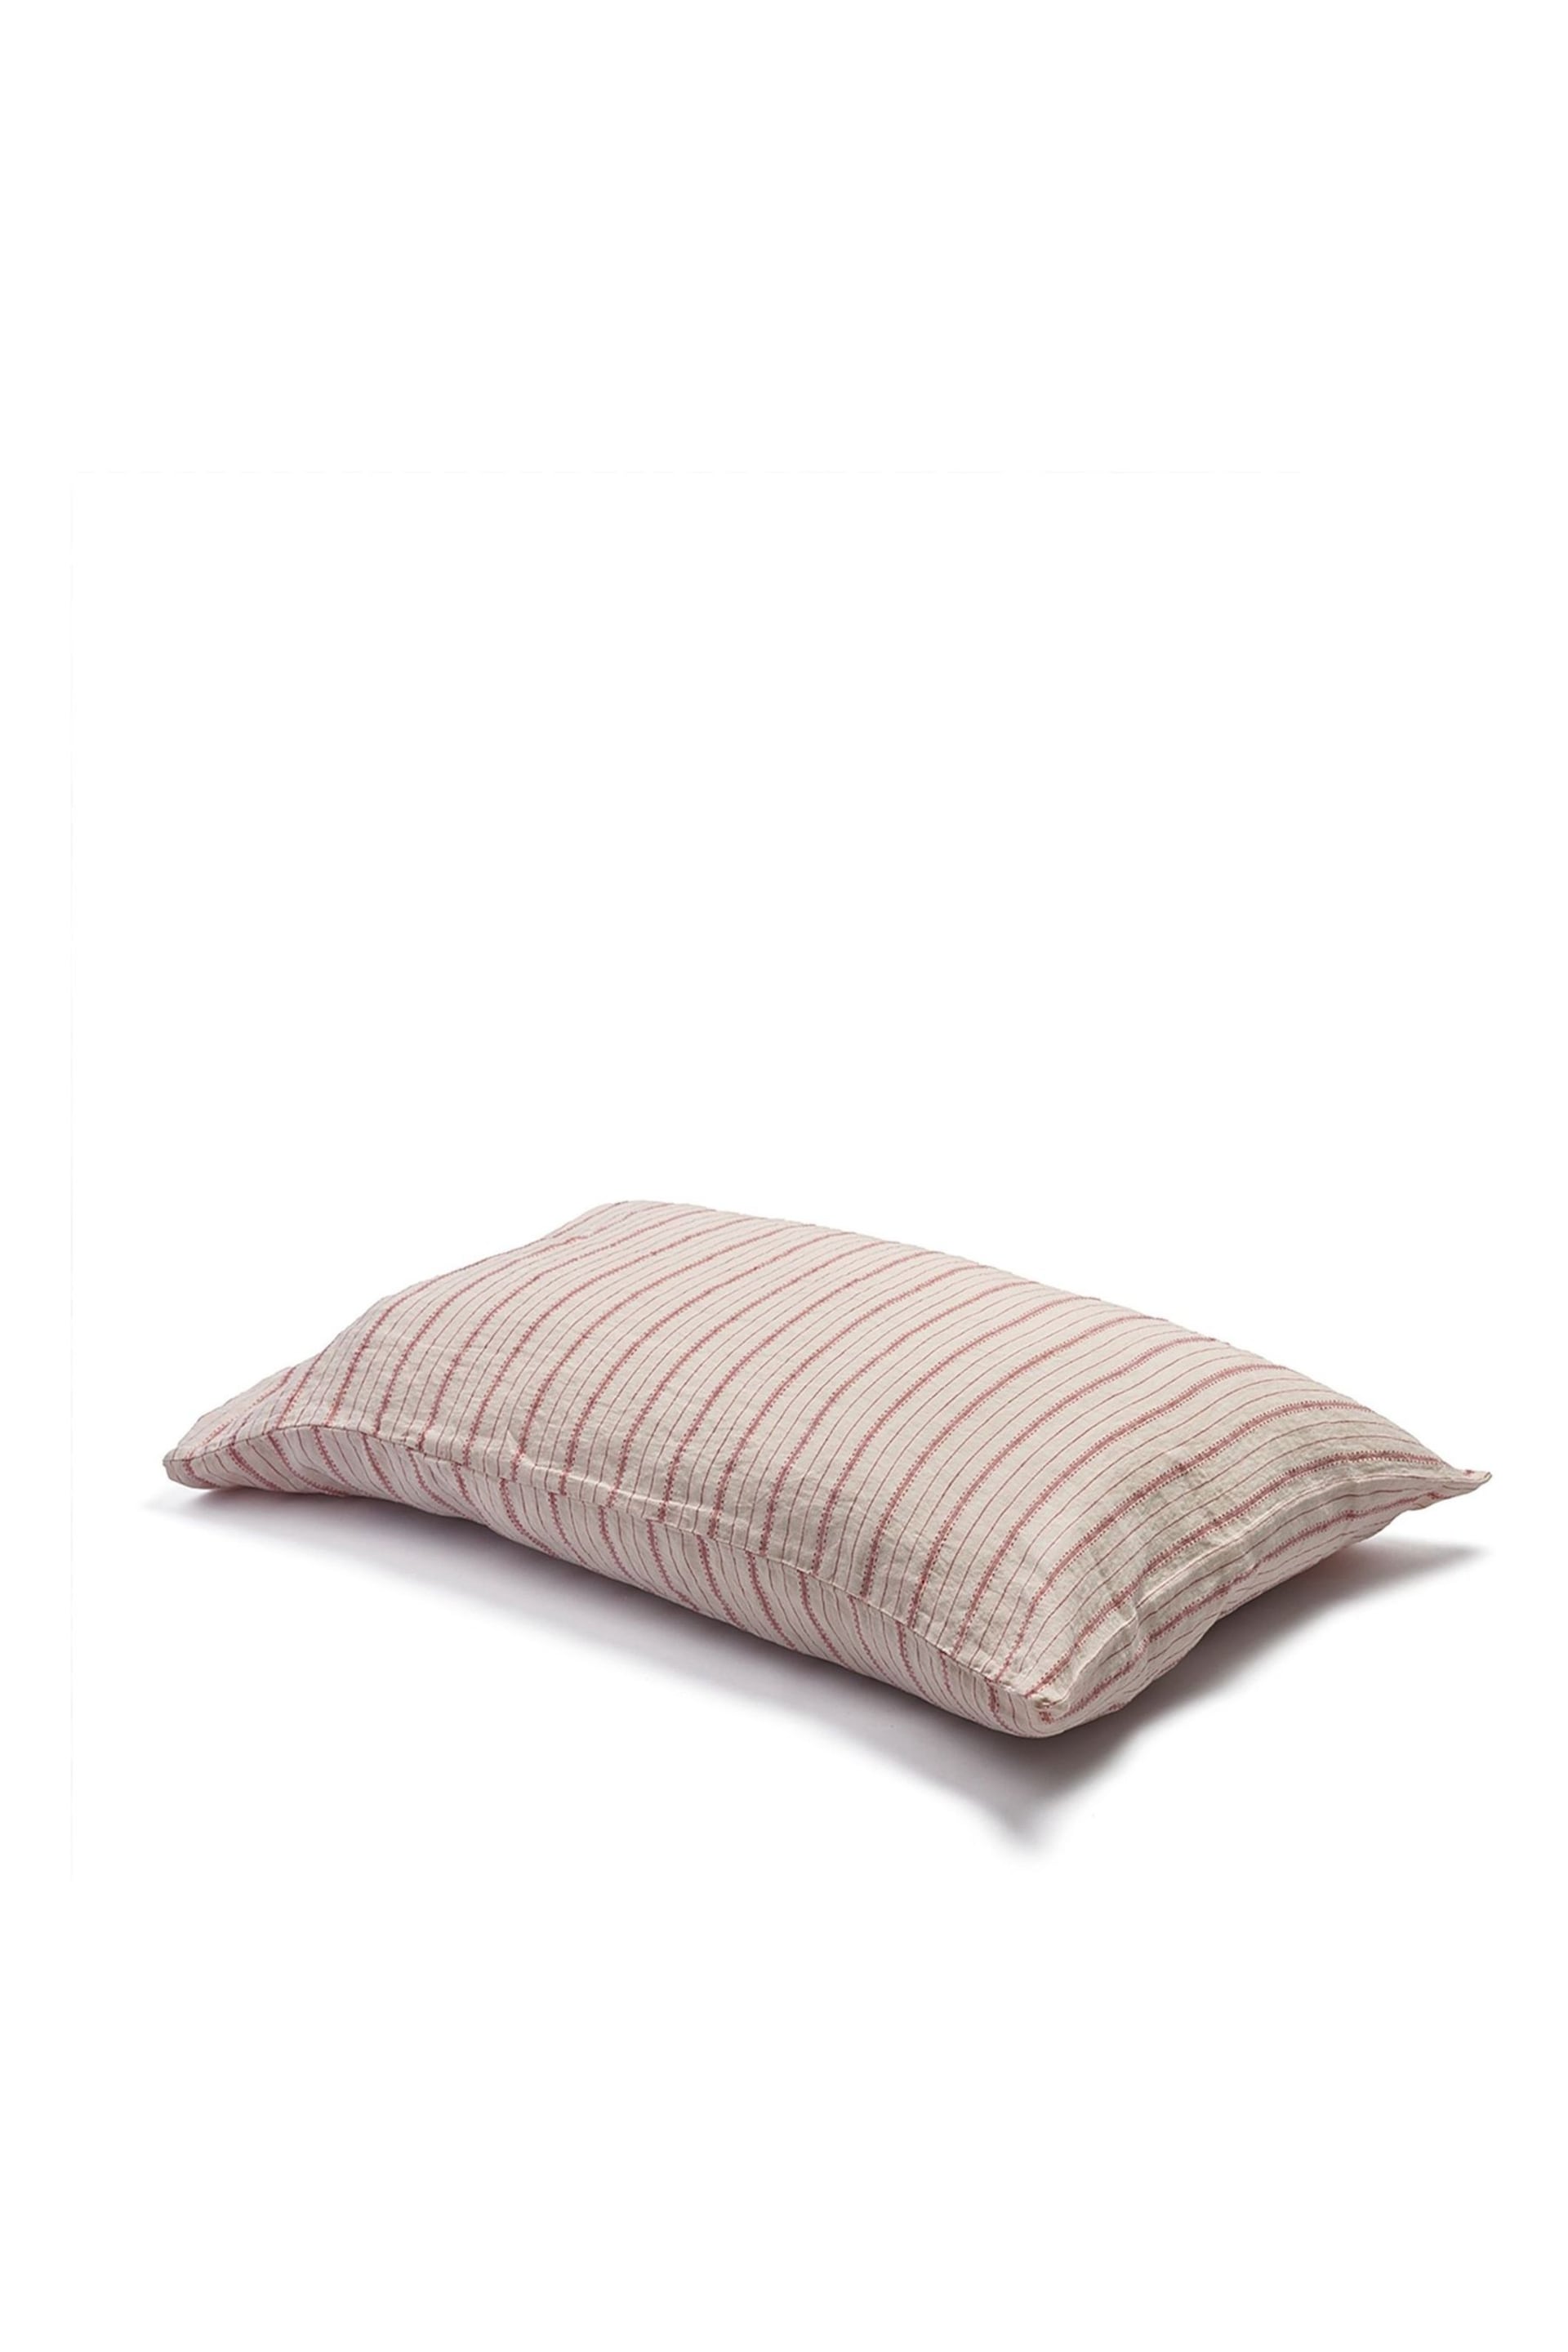 Piglet in Bed Mineral Red Ticking Stripe Set of 2 Linen Pillowcases - Image 2 of 2